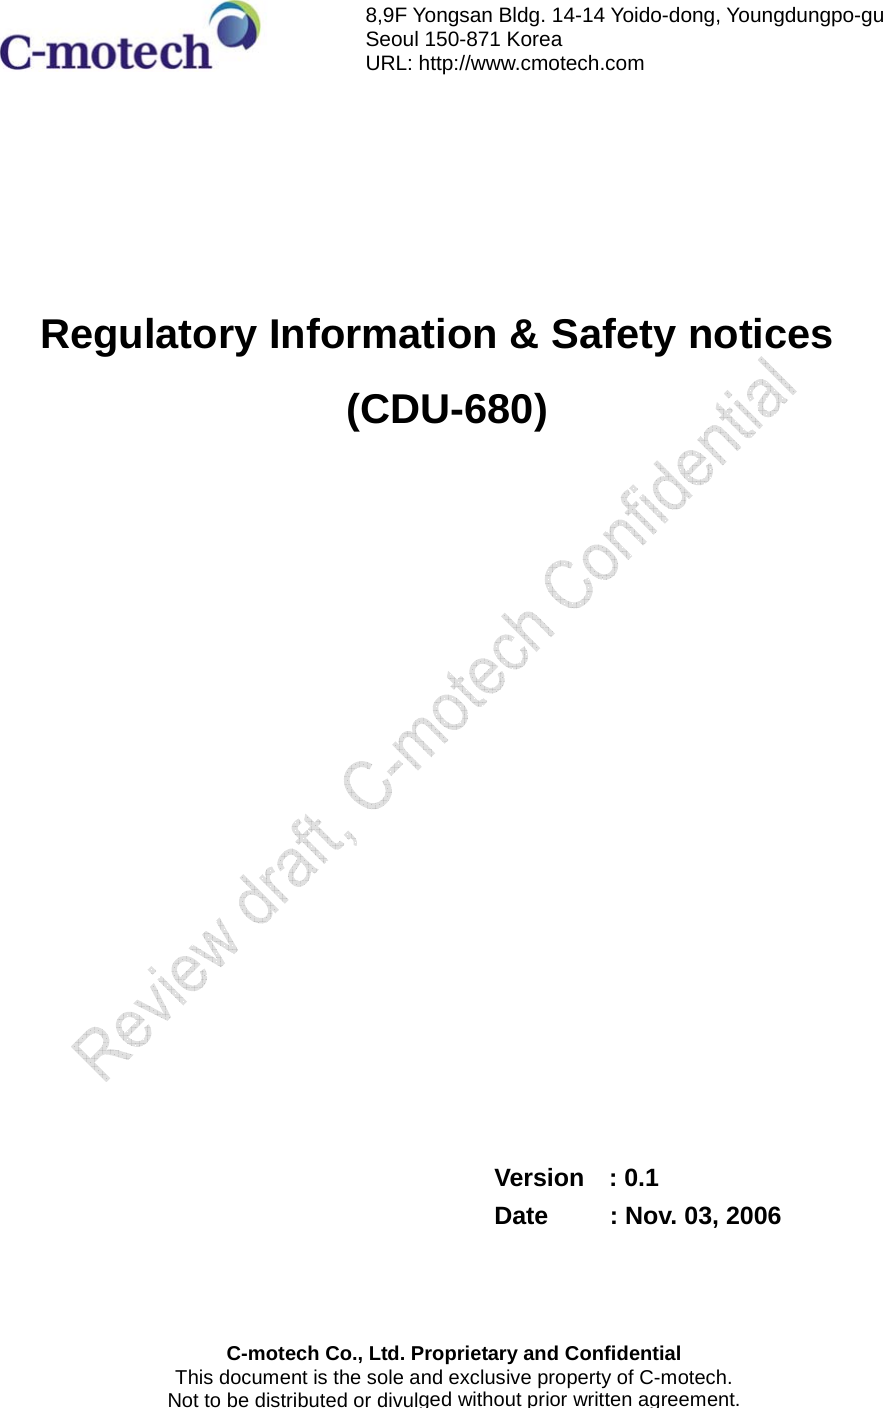        Regulatory Information &amp; Safety notices    (CDU-680)                  Version  : 0.1 Date     : Nov. 03, 2006   C-motech Co., Ltd. Proprietary and ConfidentialThis document is the sole and exclusive property of C-motech. Not to be distributed or divulged without prior written agreement. 8,9F Yongsan Bldg. 14-14 Yoido-dong, Youngdungpo-gu   Seoul 150-871 Korea URL: http://www.cmotech.com 